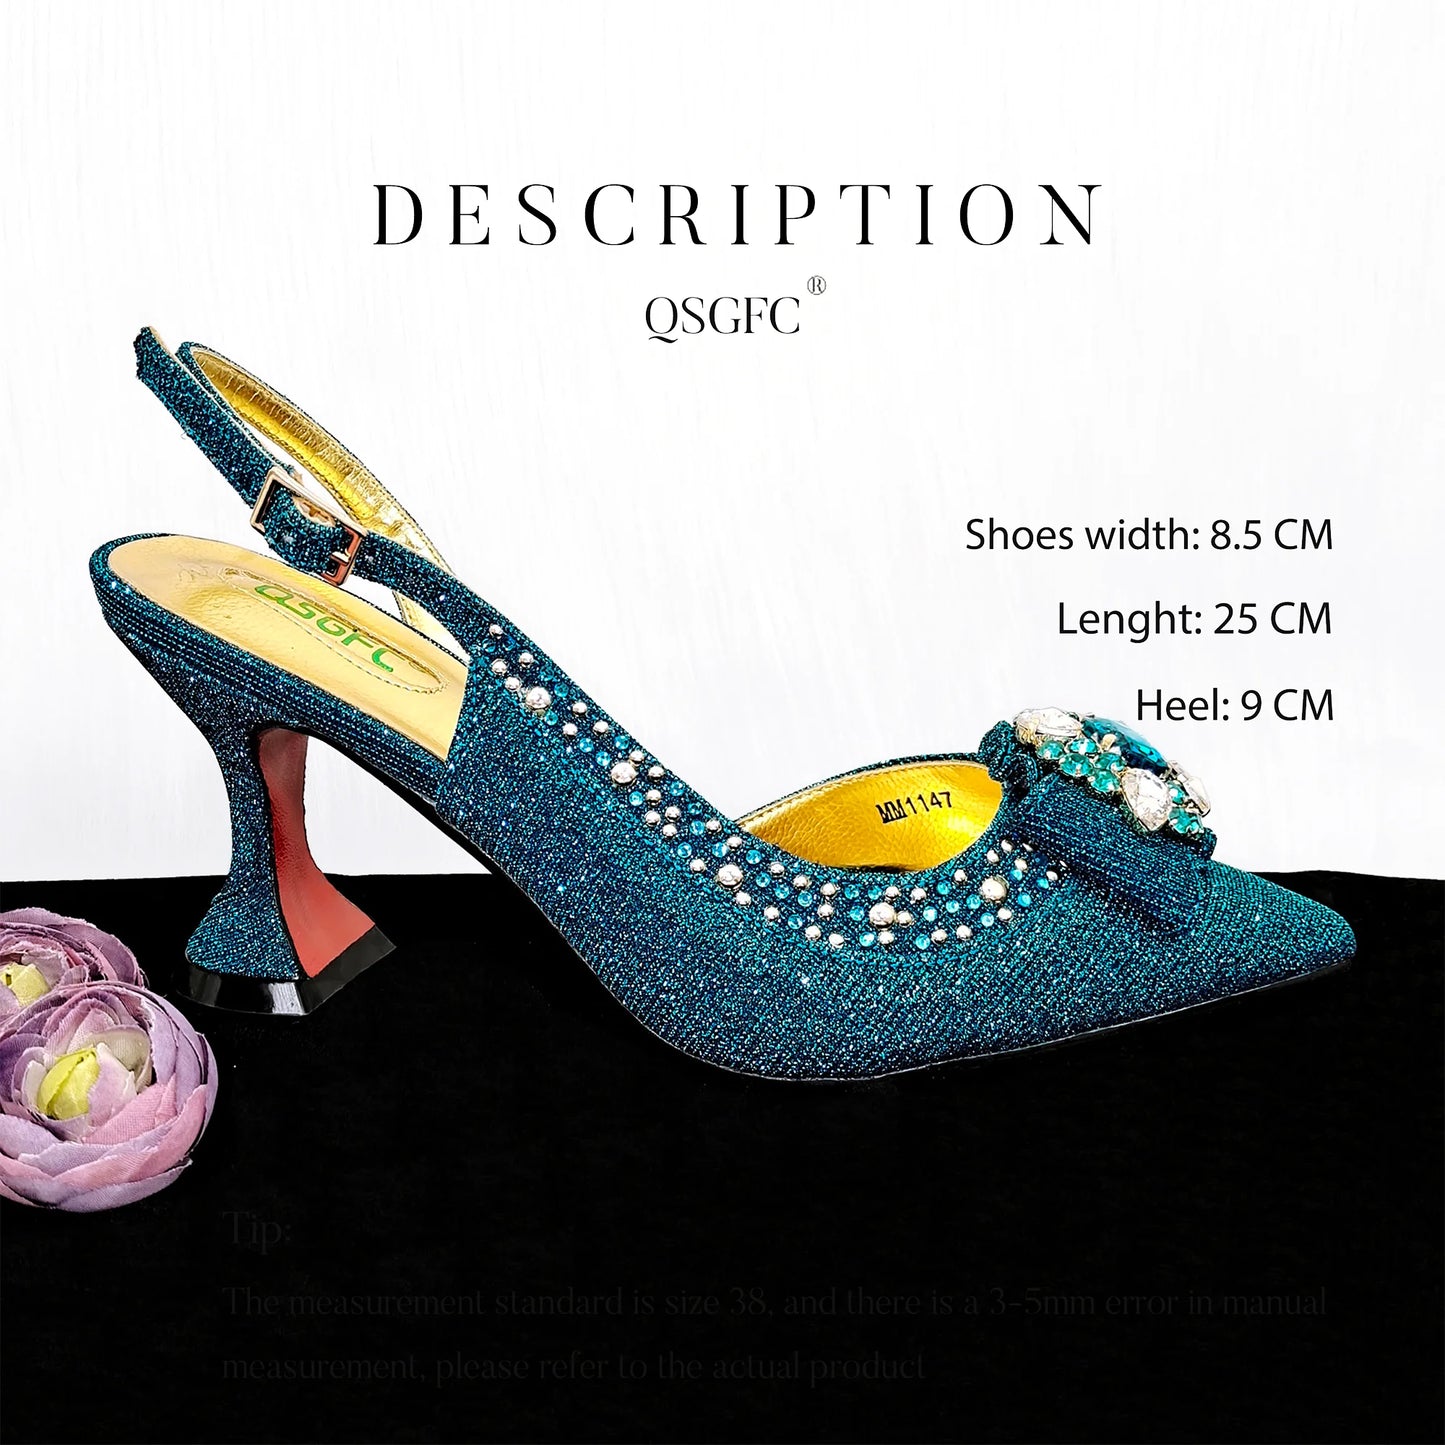 QSGFC Italian Design Noble Dual-Purpose Three-Dimensional Bag And Ladies Heel Shoes Shiny Material For Nigeria Wedding Party